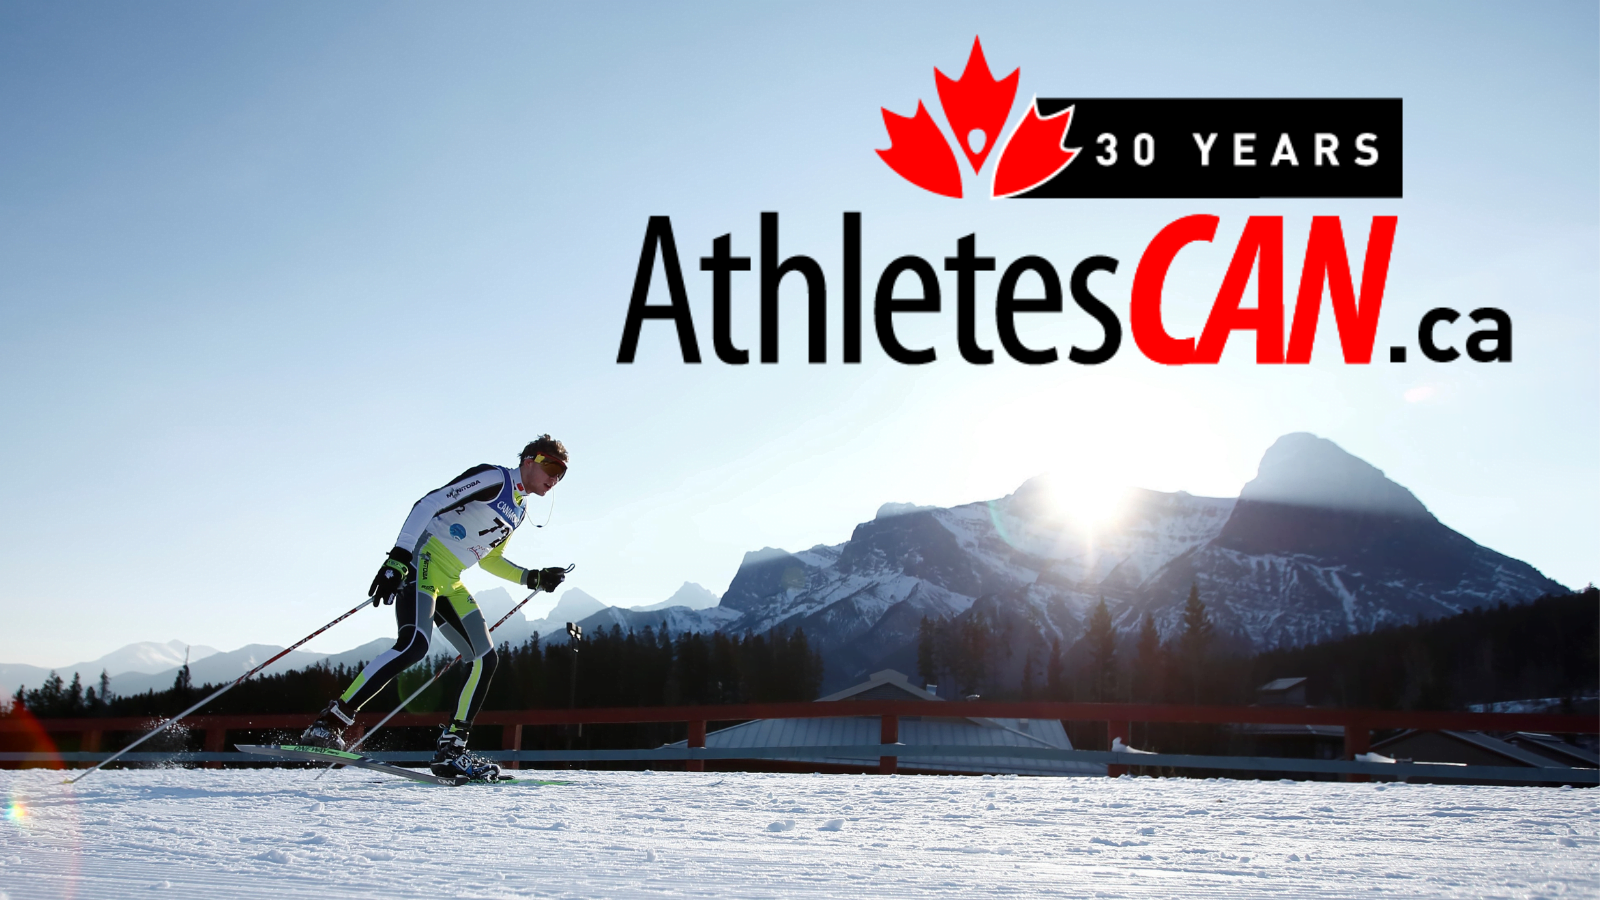 New website, AthletesCAN.ca launches to mark organization’s 30th anniversary